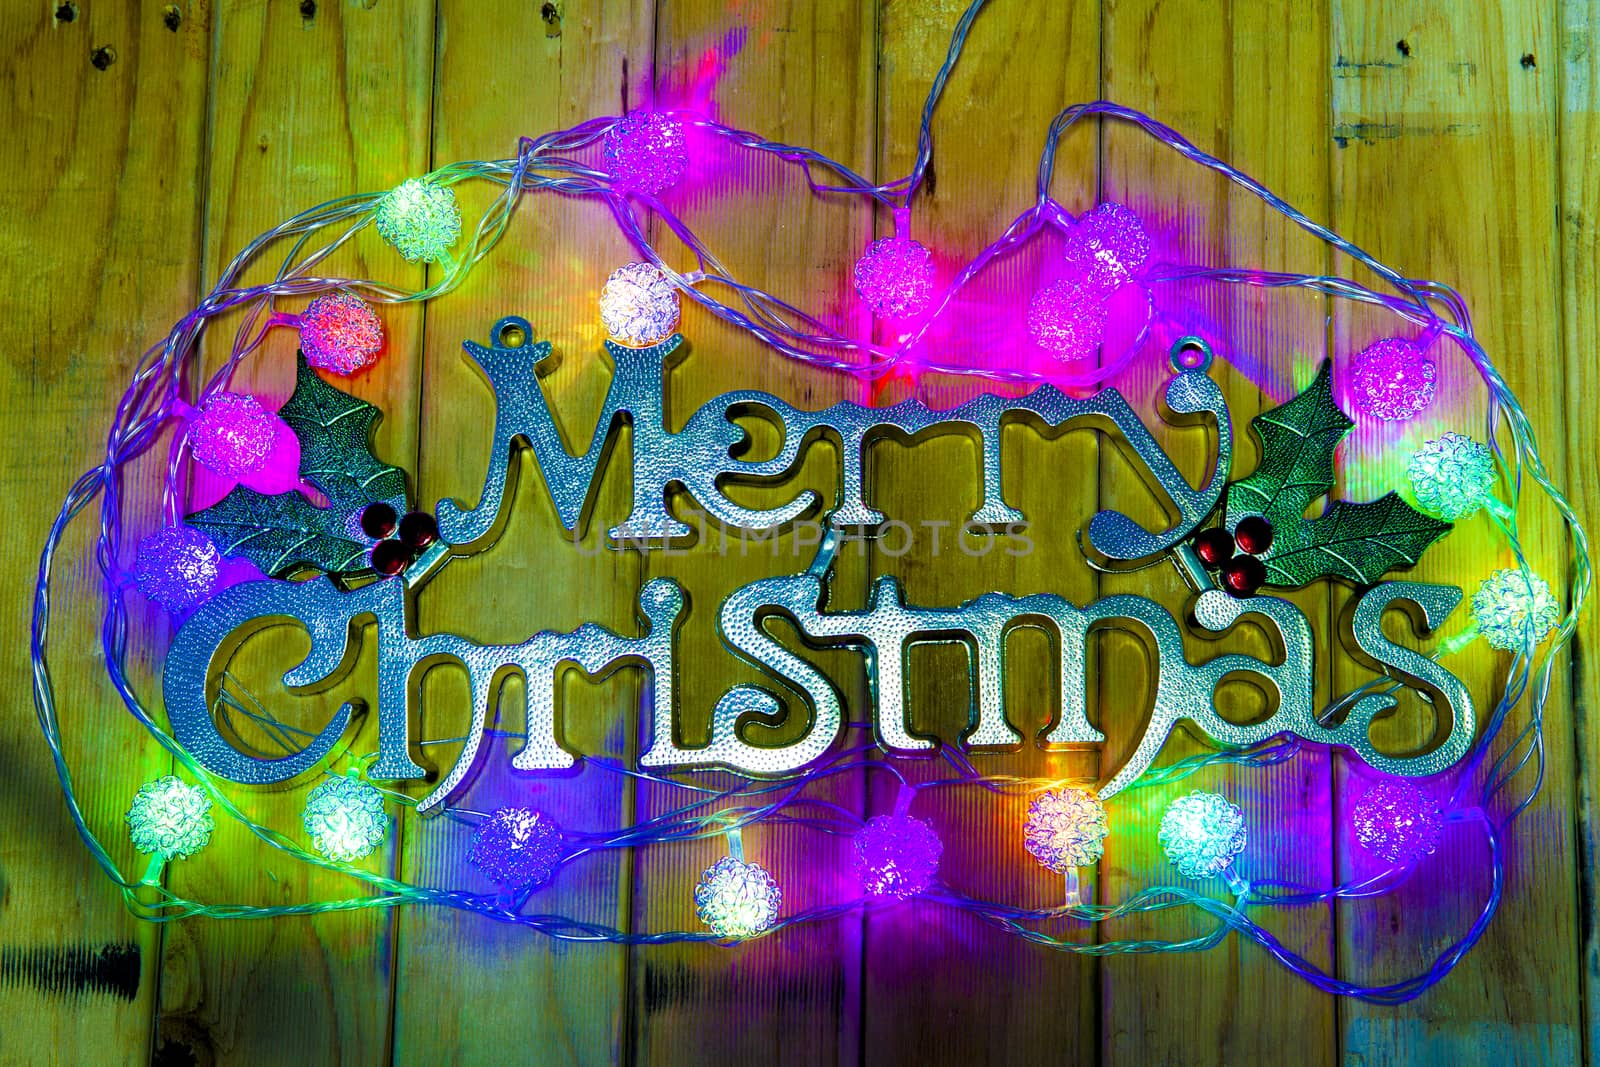 Merry Christmas and lighting by Chattranusorn09